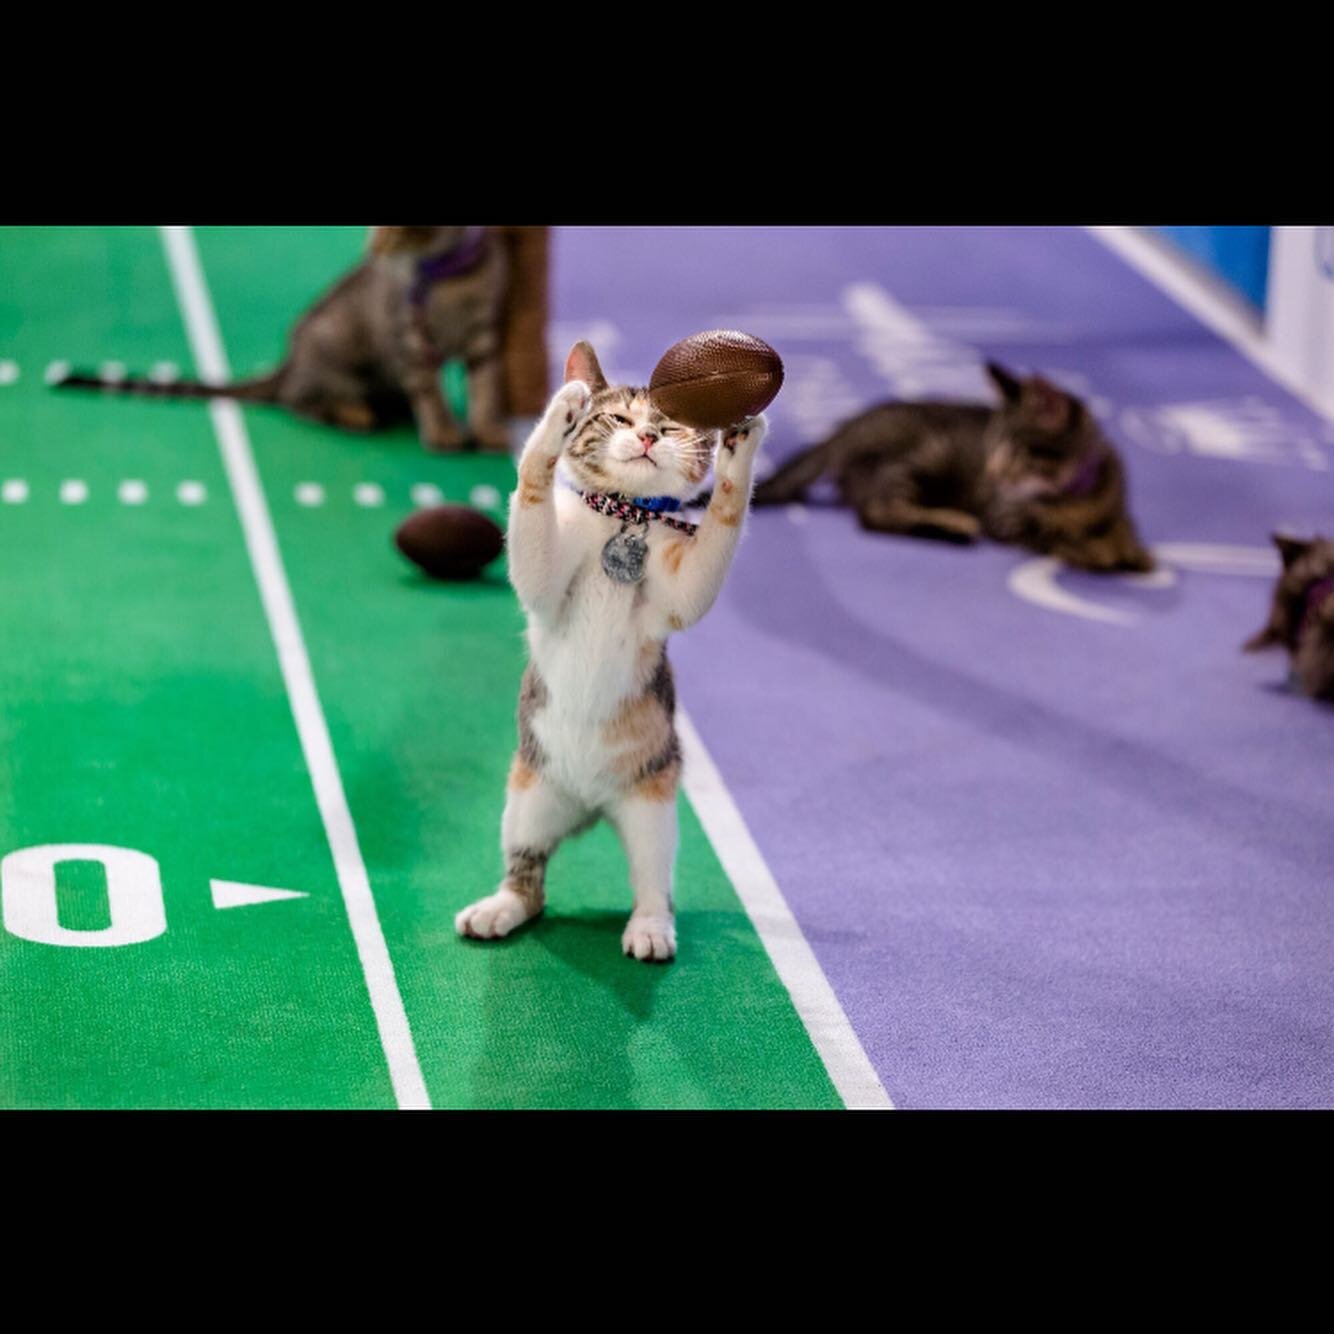 Hallmark Channel's KITTEN BOWL wants to see your cats in action! Funny tricks, unique grooming habits, adorable sleeping, crazy play - we want them all! To be featured in our 2021 show please submit short &quot;viral worthy&quot; videos of your cat, 